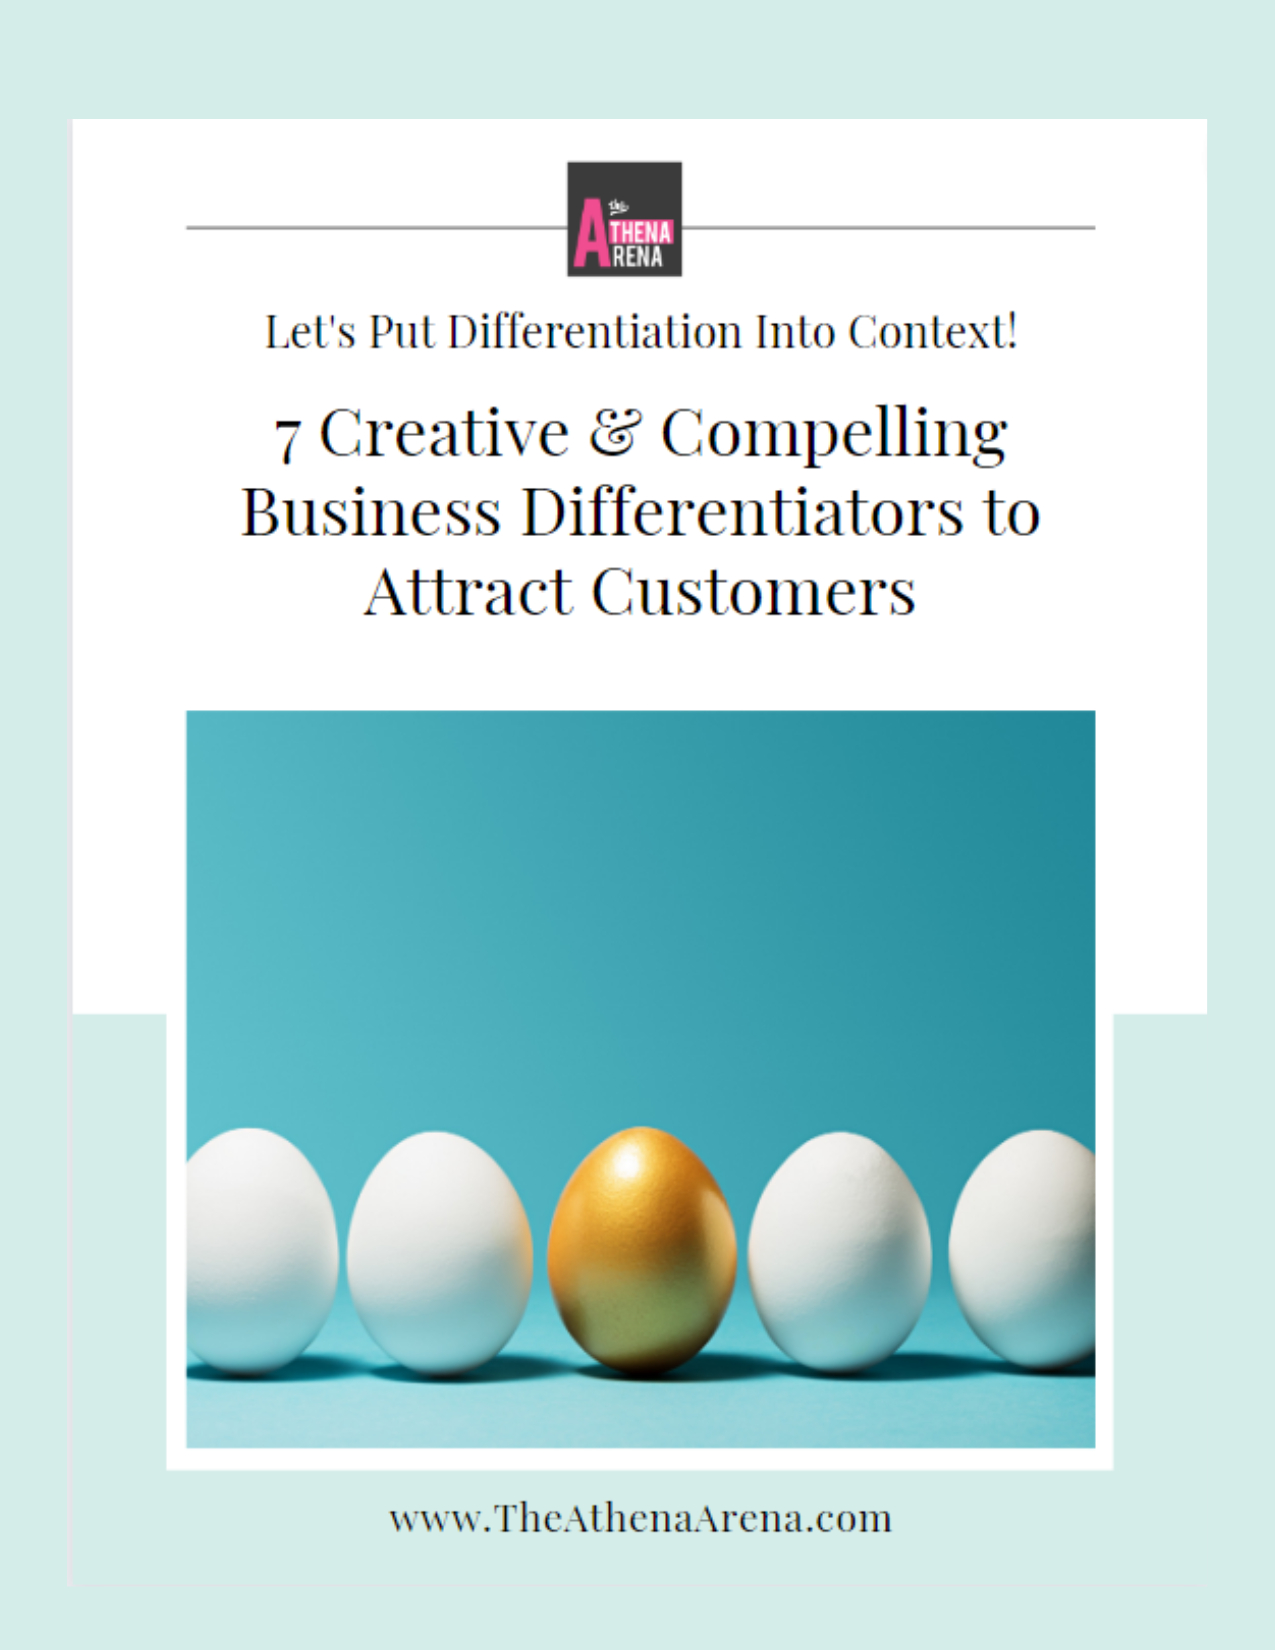 7 Creative and Compelling Business Differentiators to Attract Customers